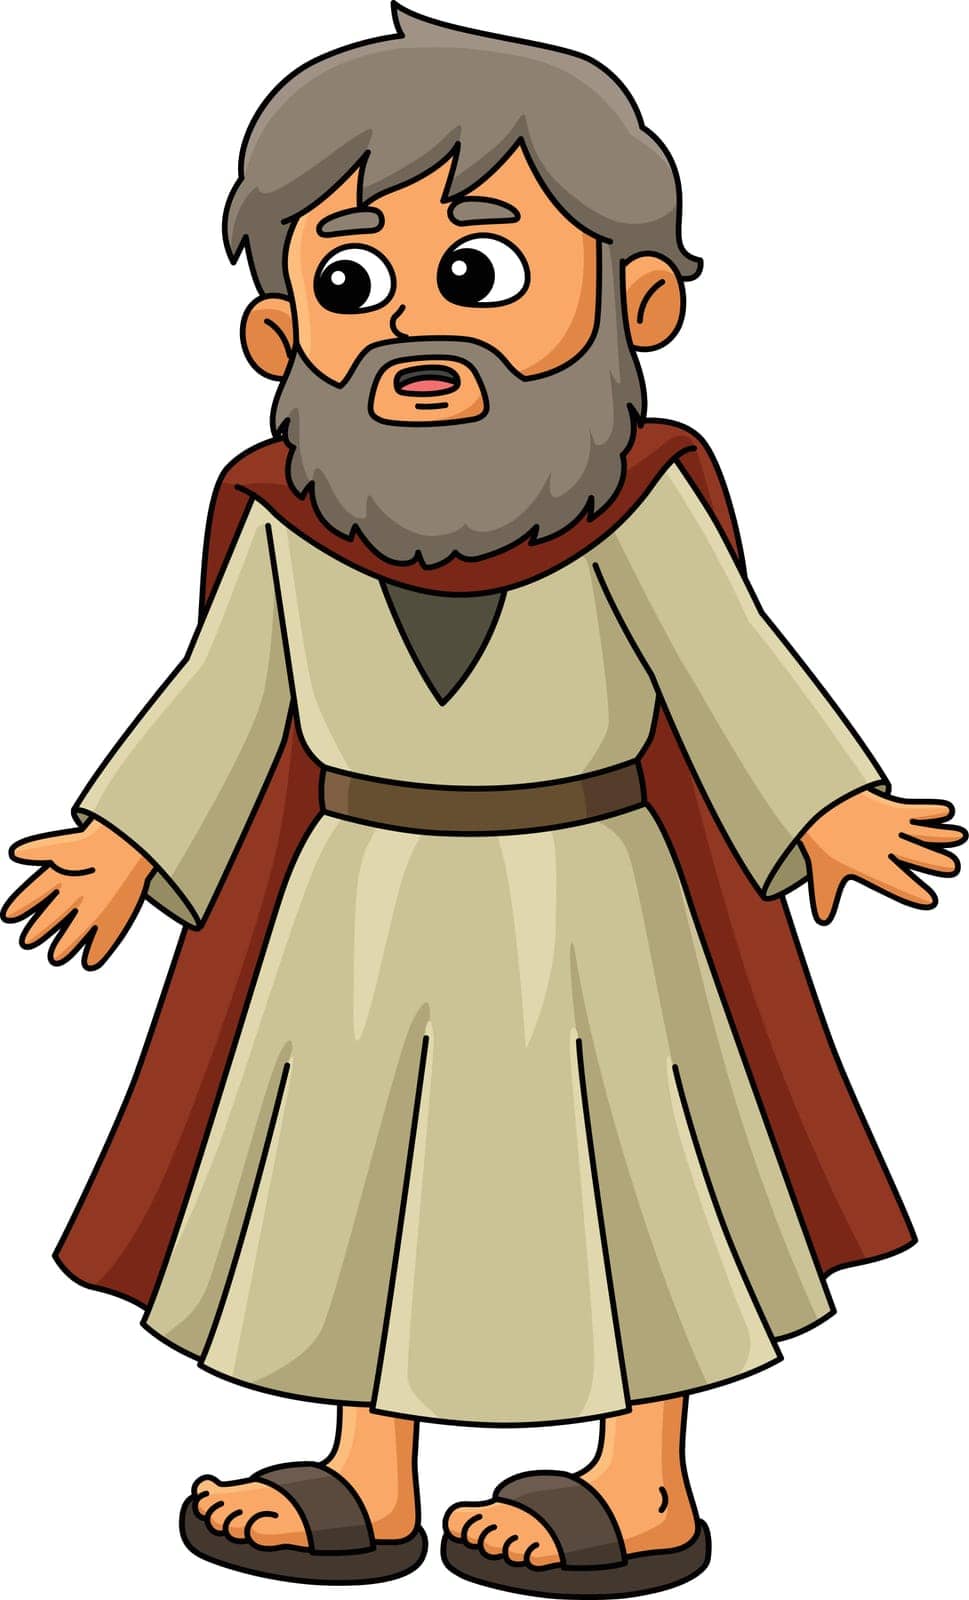 Moses Cartoon Colored Clipart Illustration by abbydesign